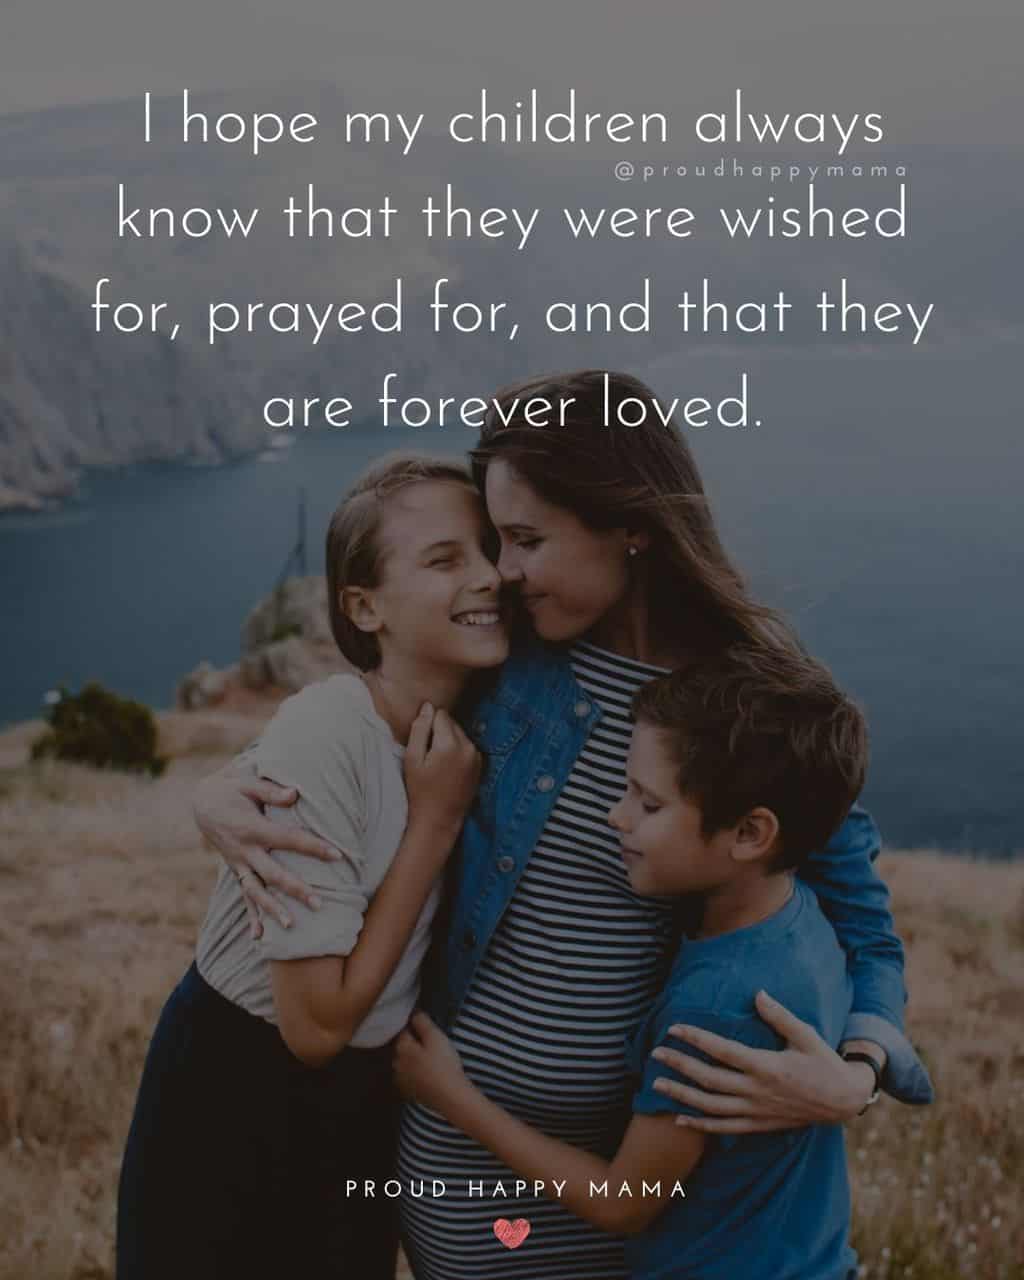 Parenting Quotes - I hope my children always know that they were wished for, prayed for, and that they are forever loved.’